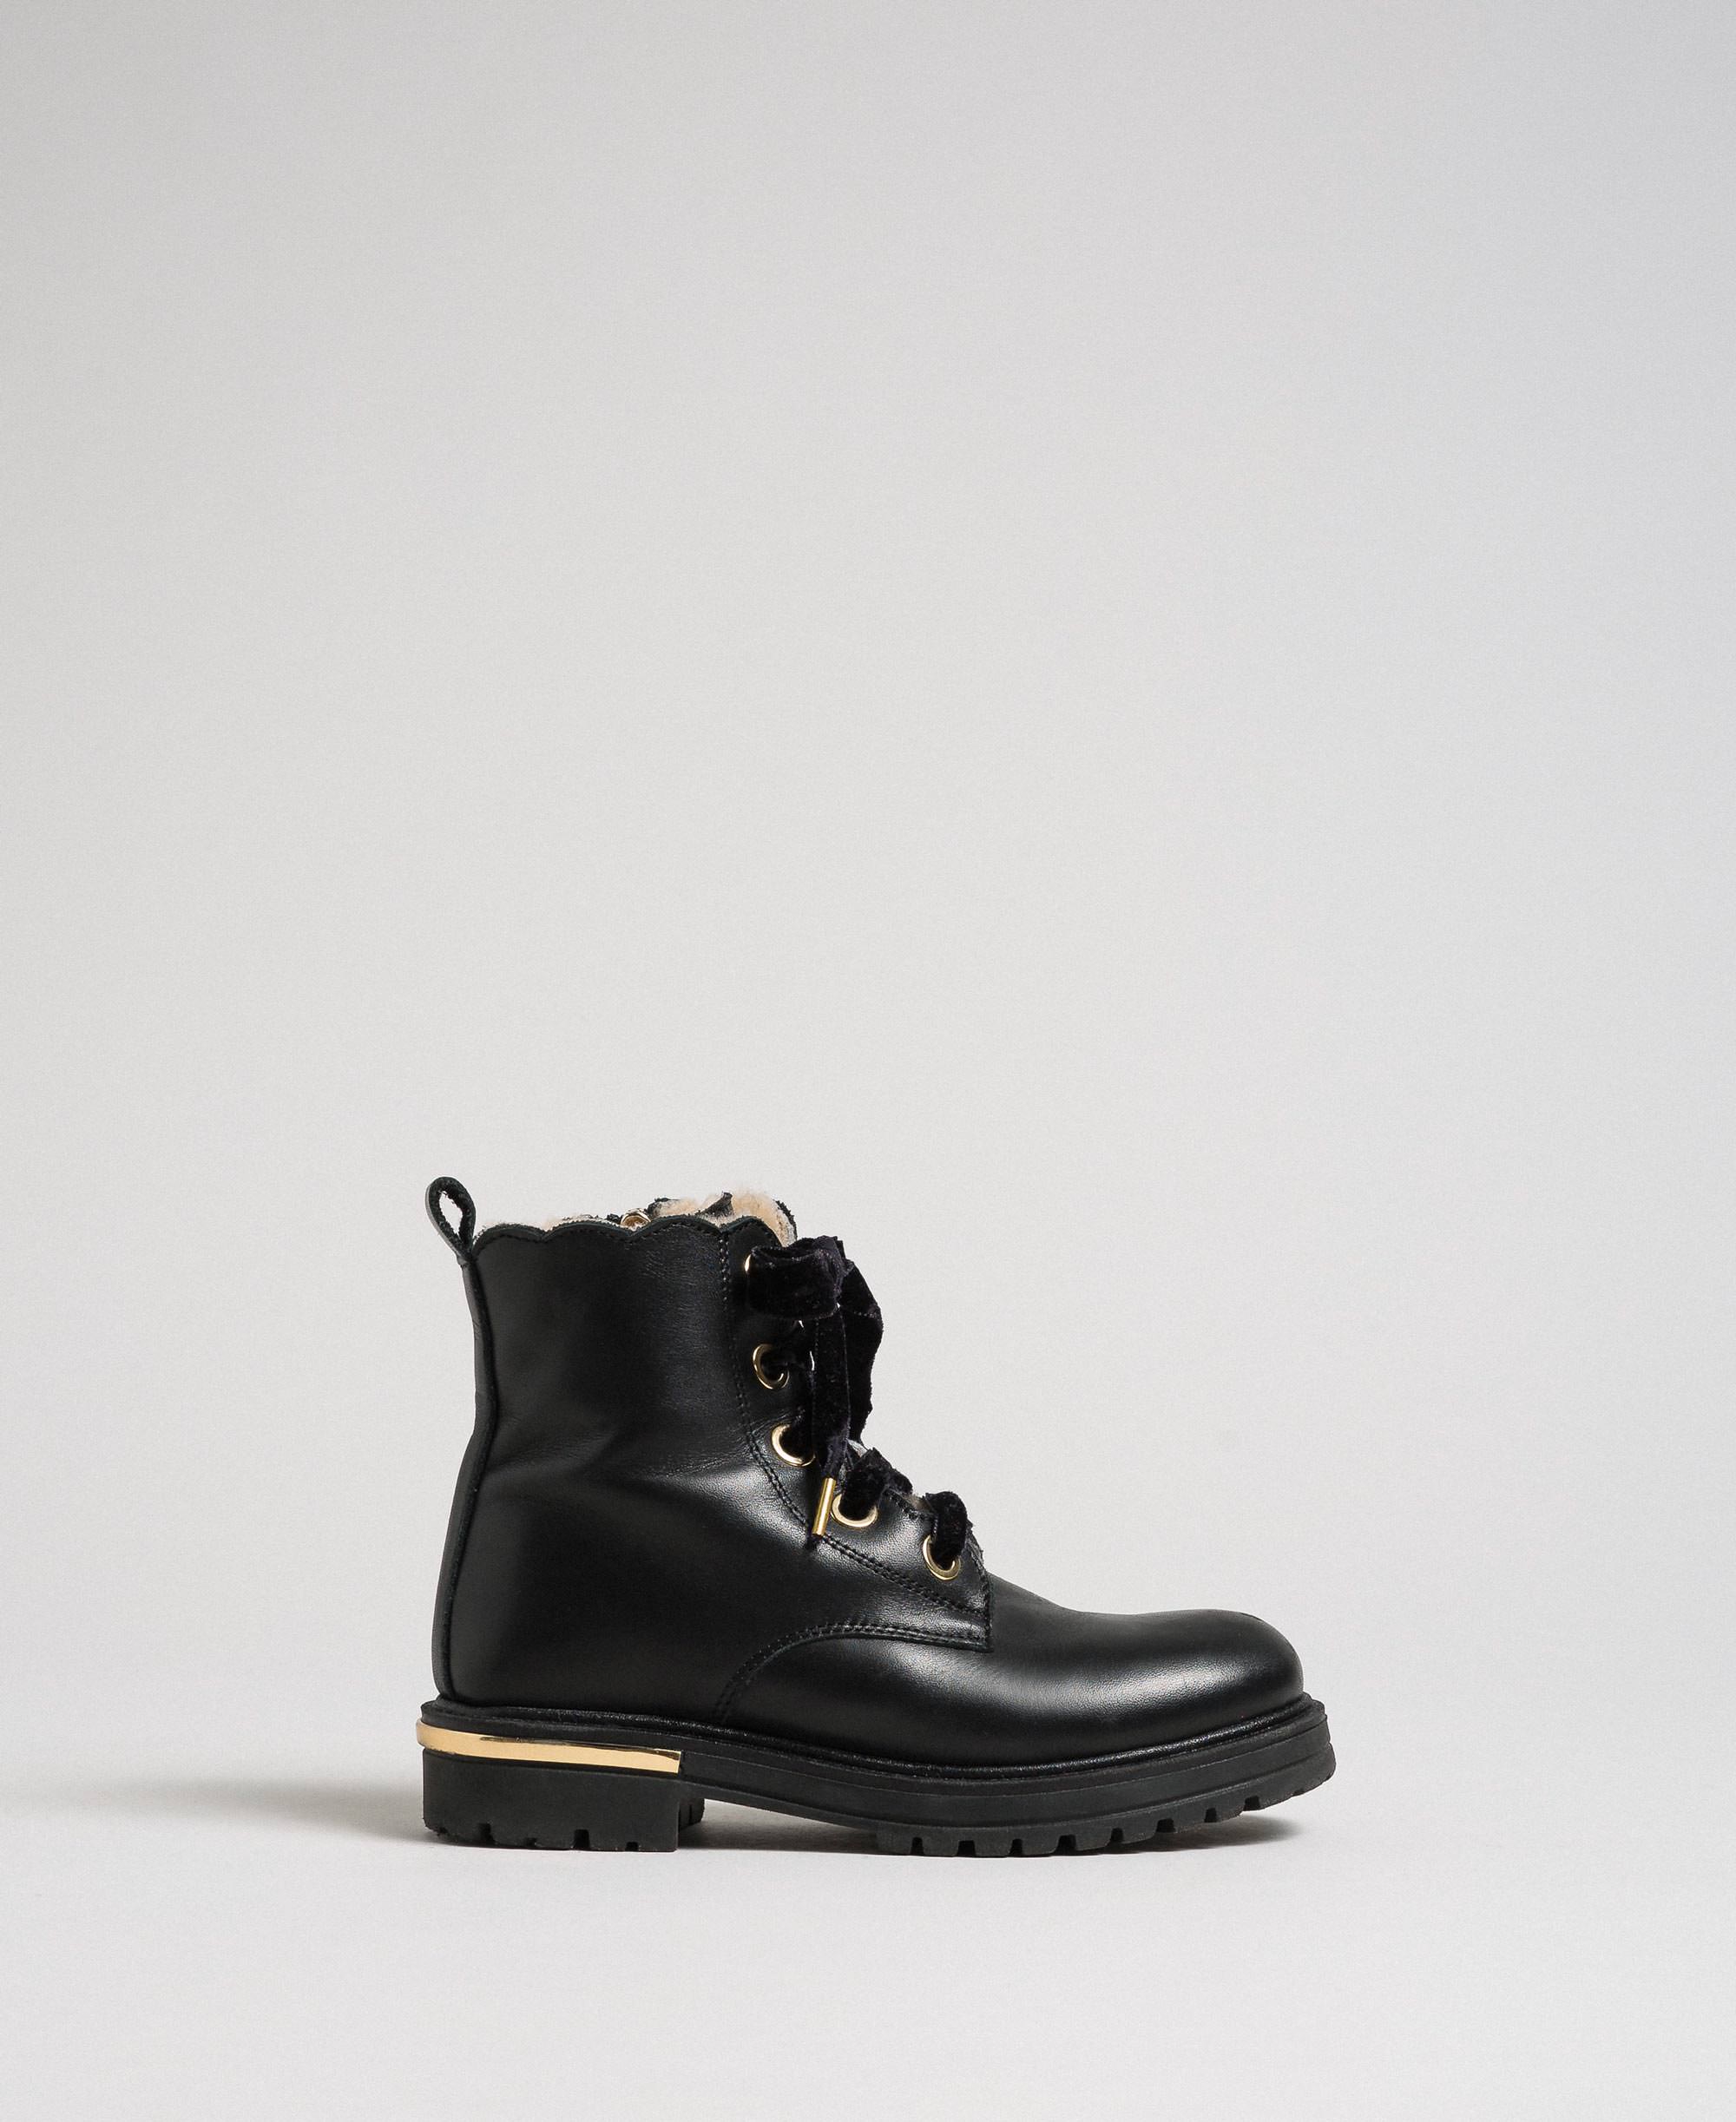 black ankle boots with metal detail